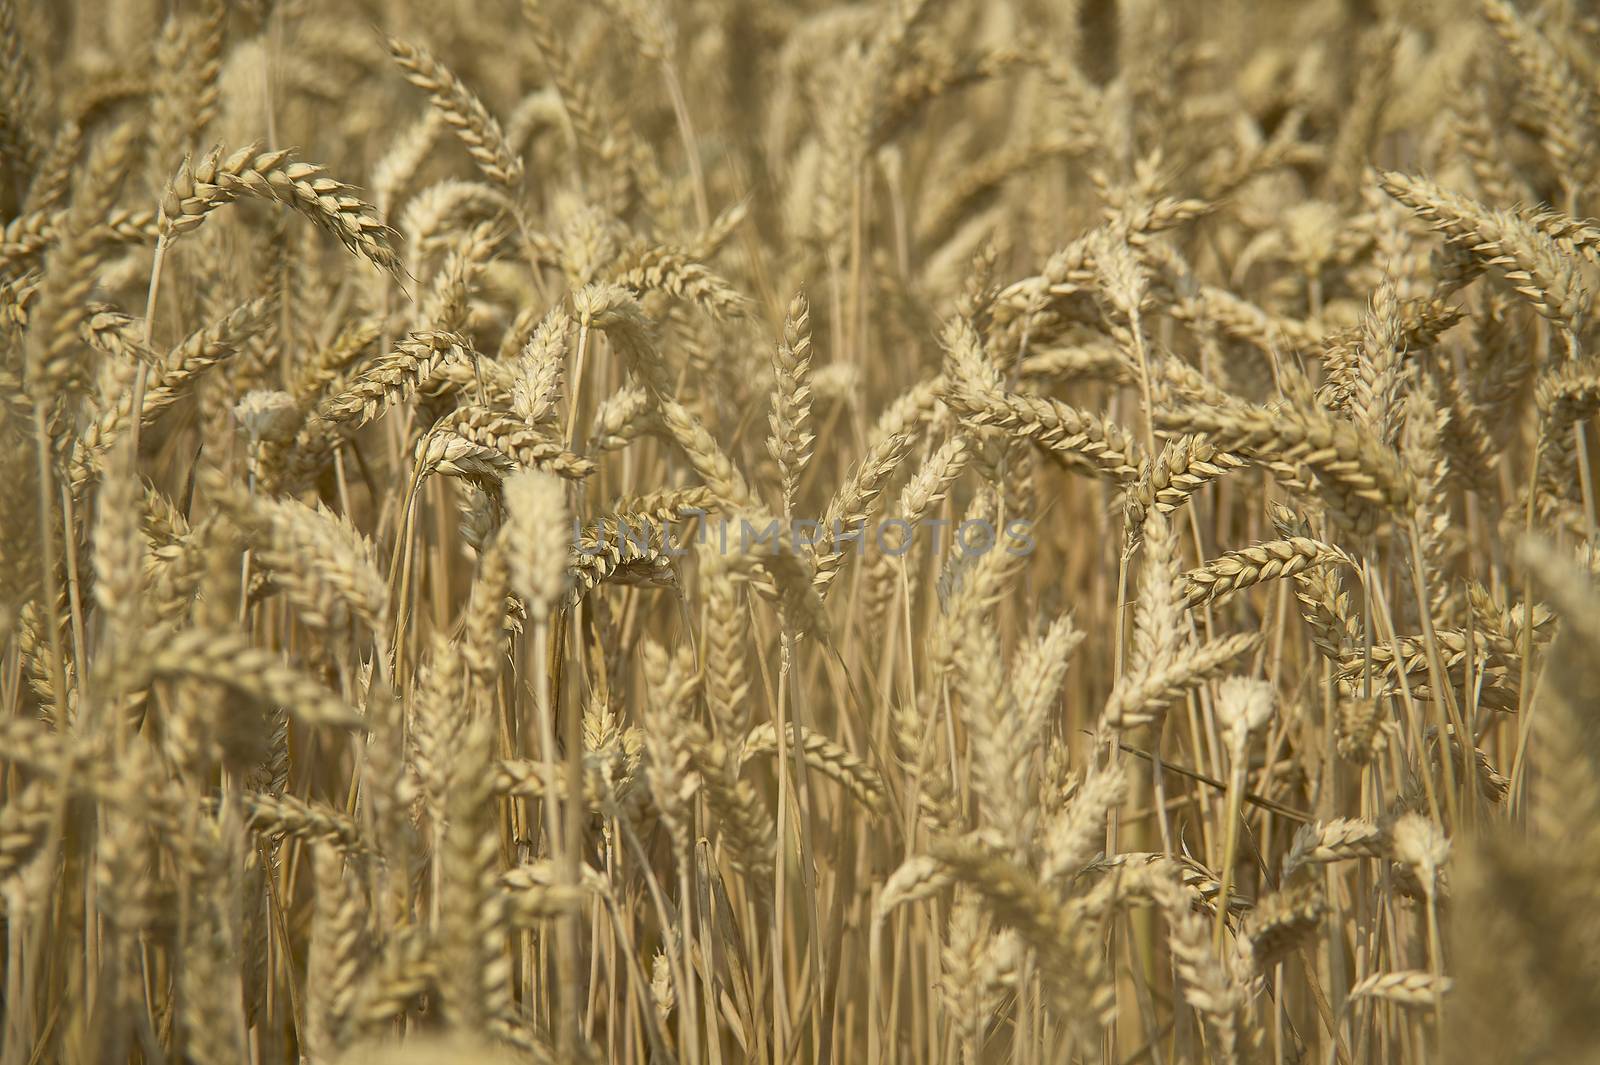 Ears and grain of wheat in a field of cultivation, agriculture in italy.